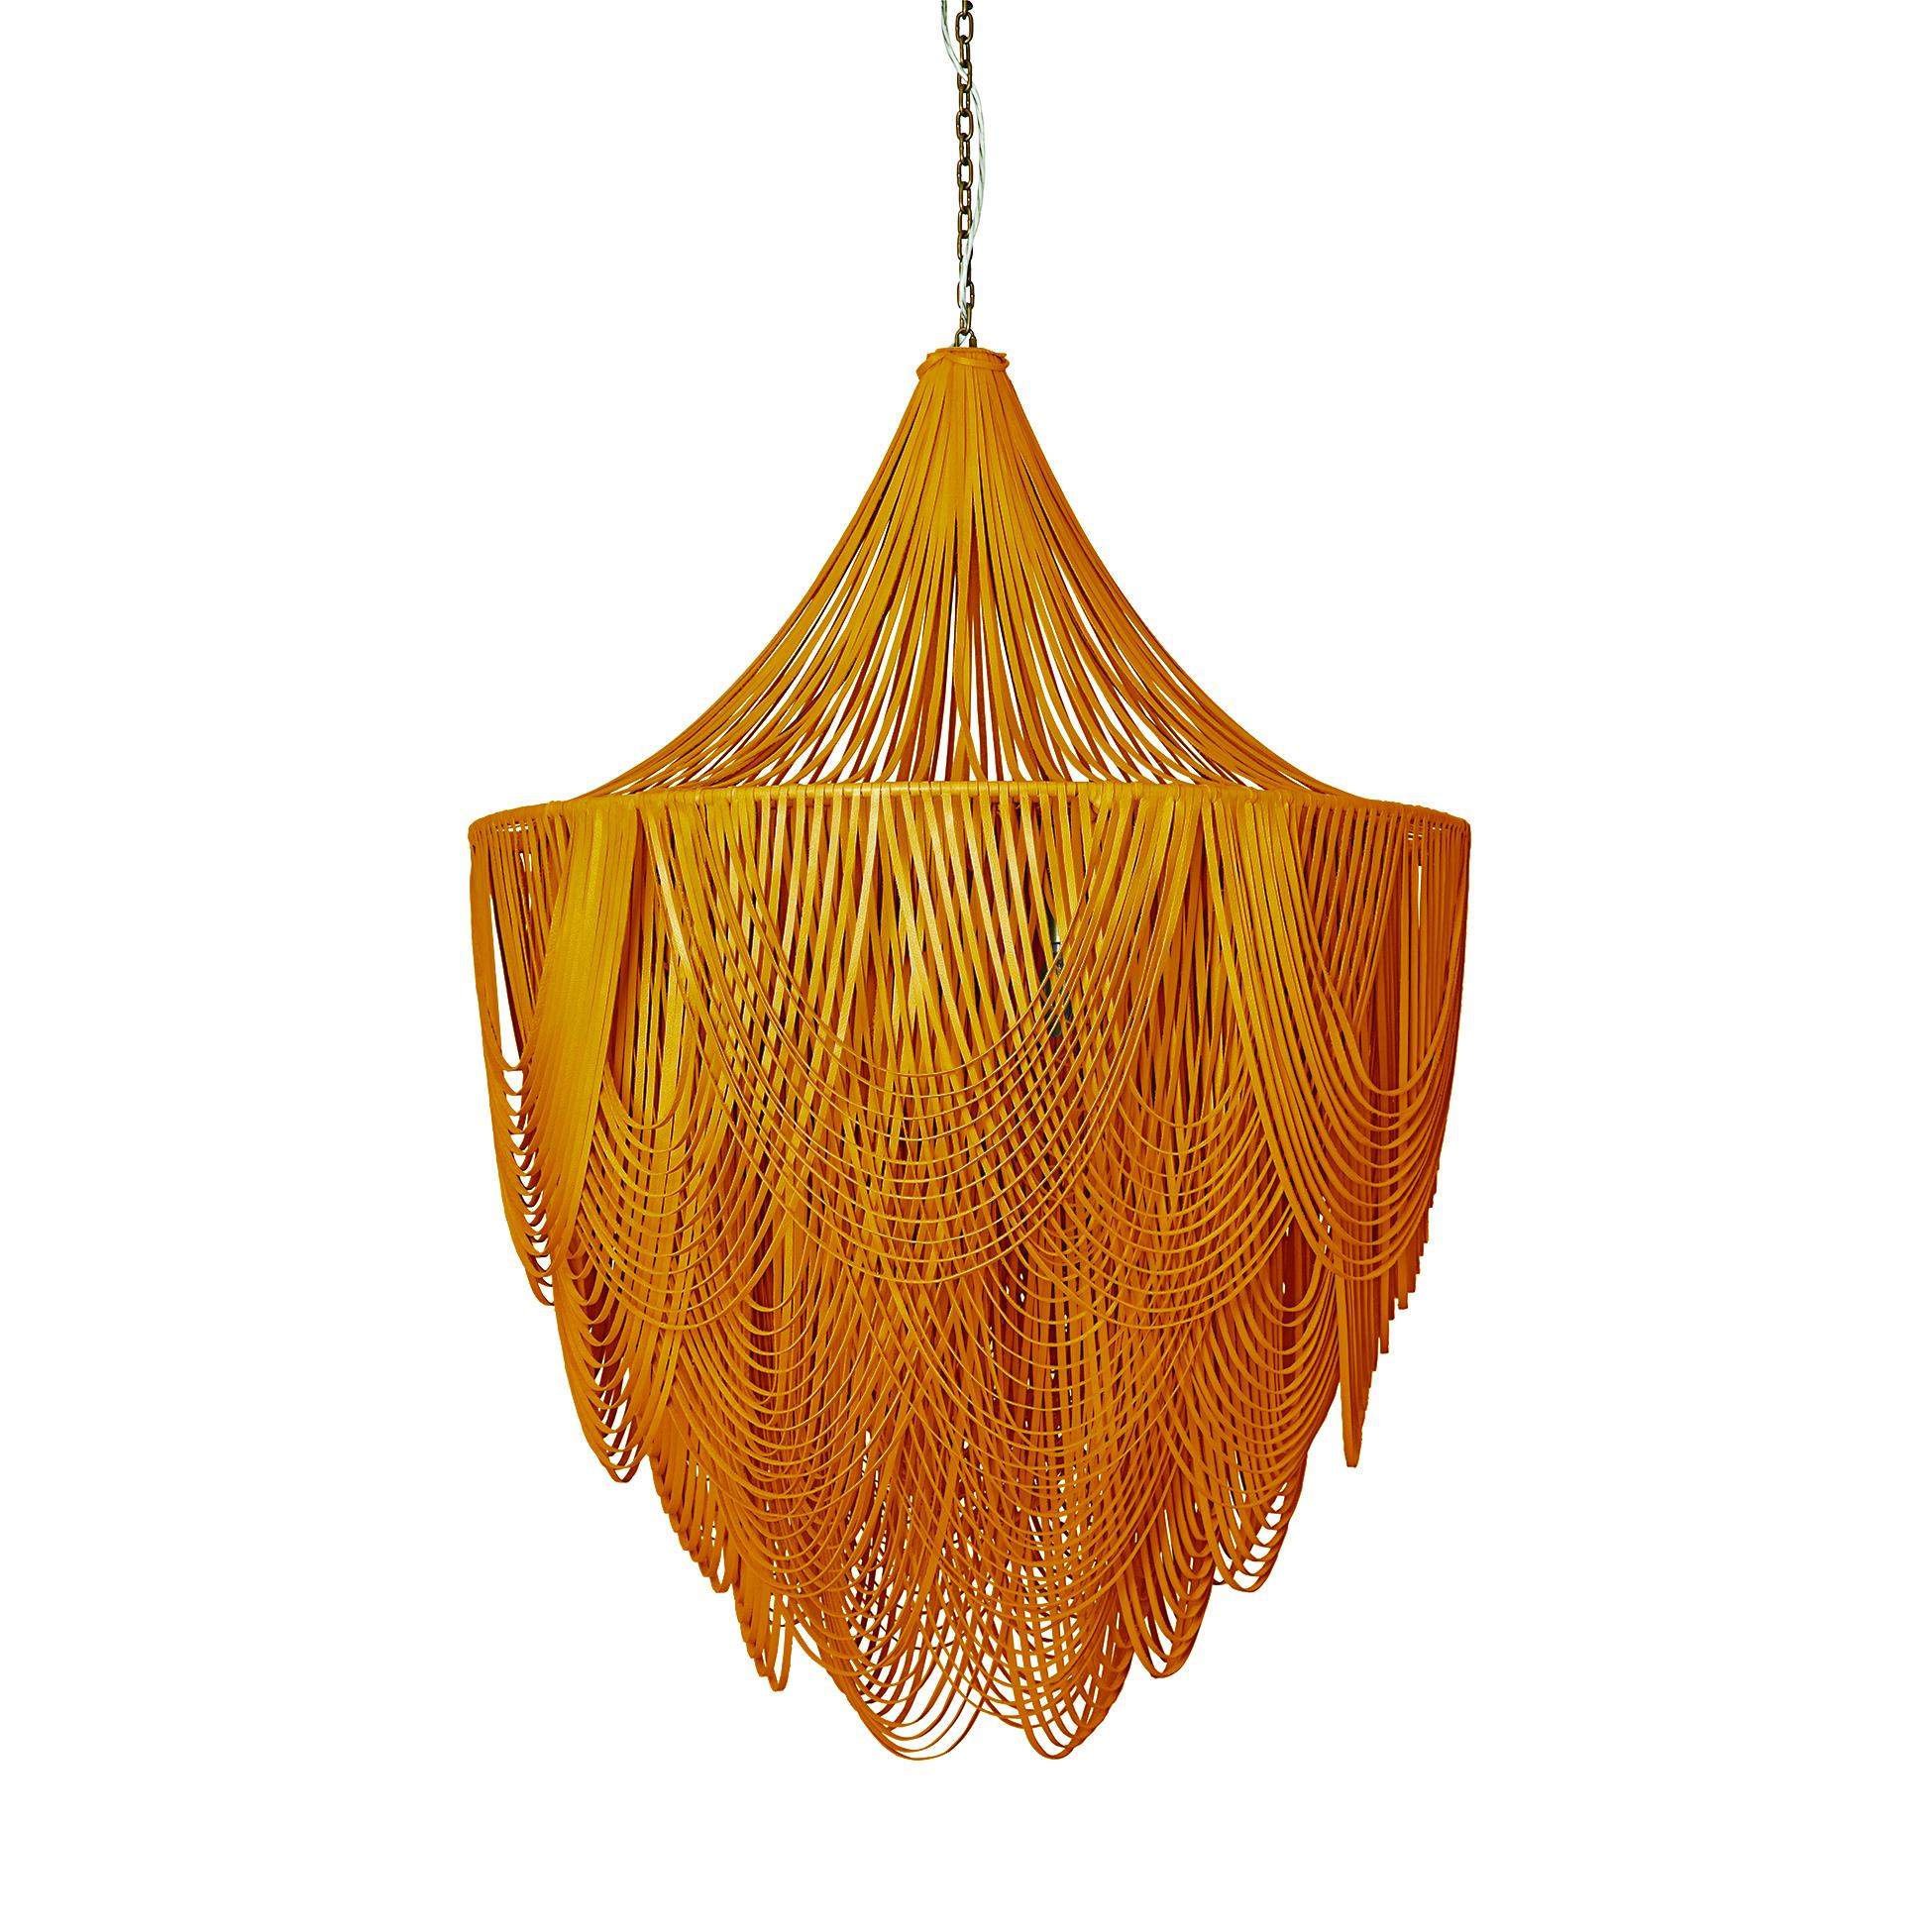 Extra Large Round Whisper with Crown Leather Chandelier in NeKeia Leather